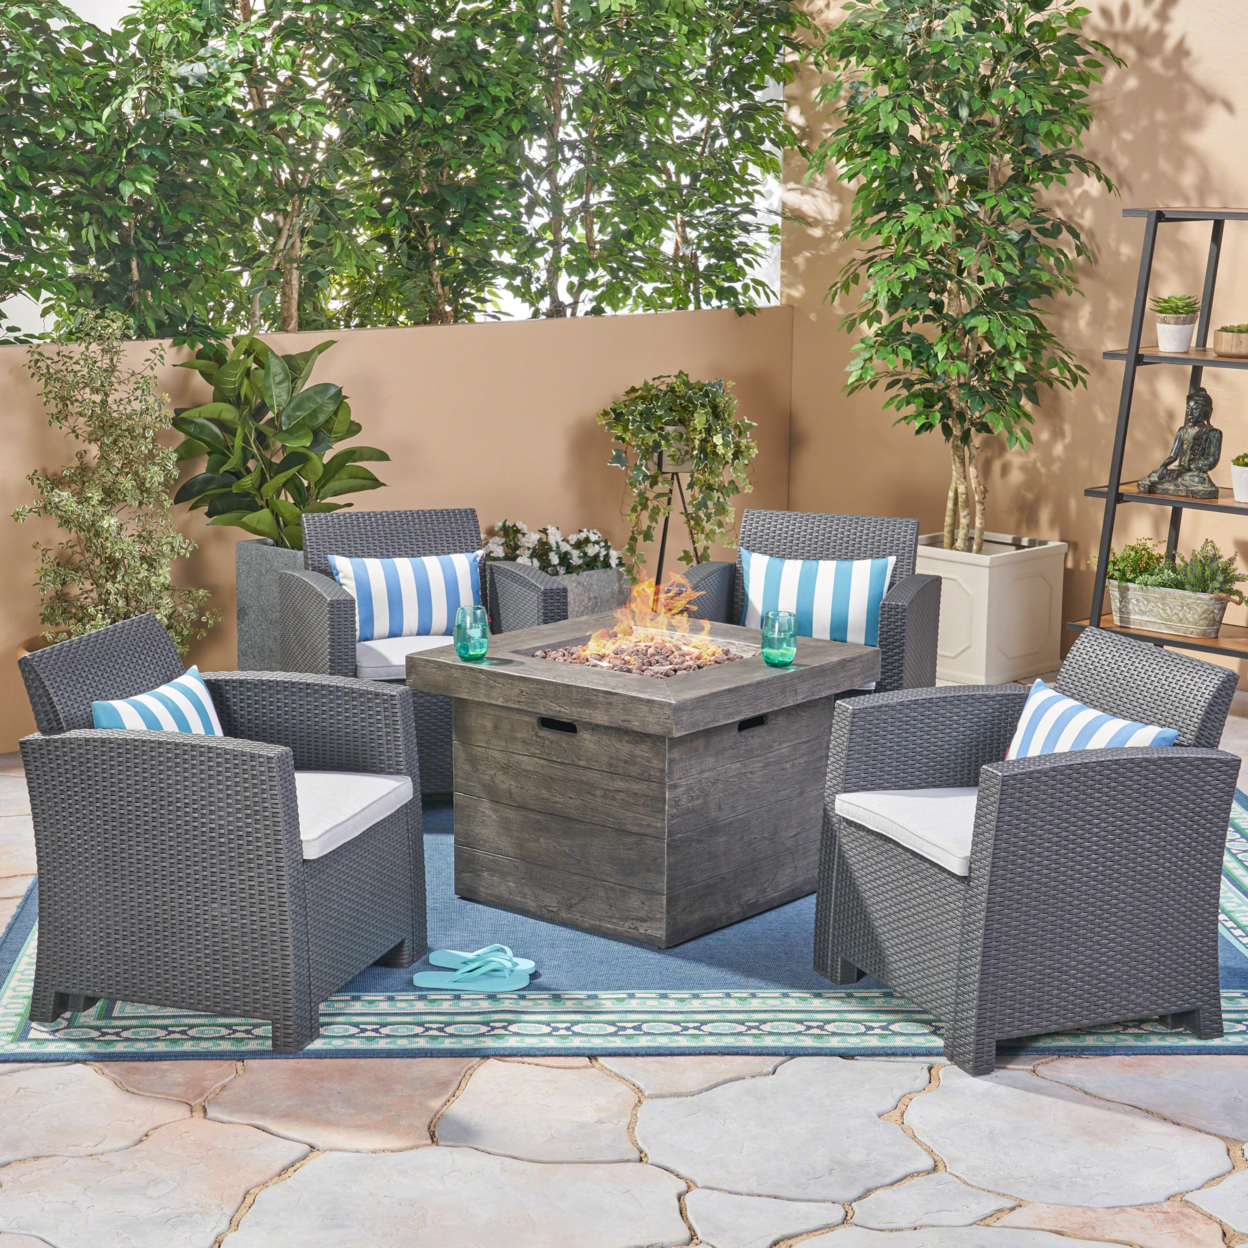 Ollie Outdoor For 4 Wicker Club Chair Chat Set With Fire Pit - Charcoal + Light Gray + Gray